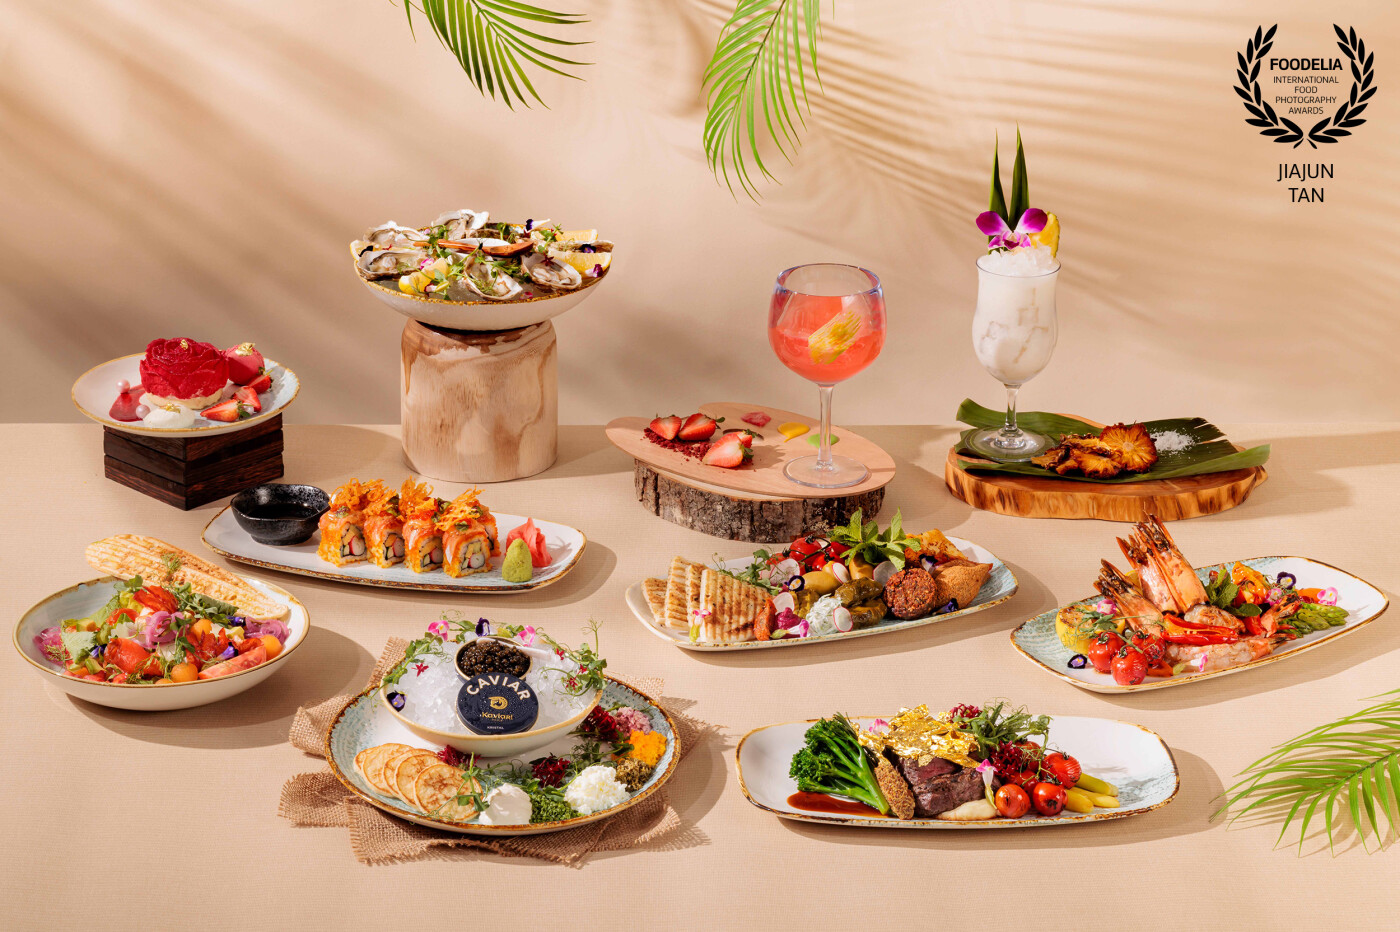 Image captured for Palawan +Twelve Singapore: a stunning array of mouthwatering dishes, all bathed in the warm, natural glow of staged outdoor sunlight. This photo isn't just about food; it's an ode to sun-kissed culinary art!